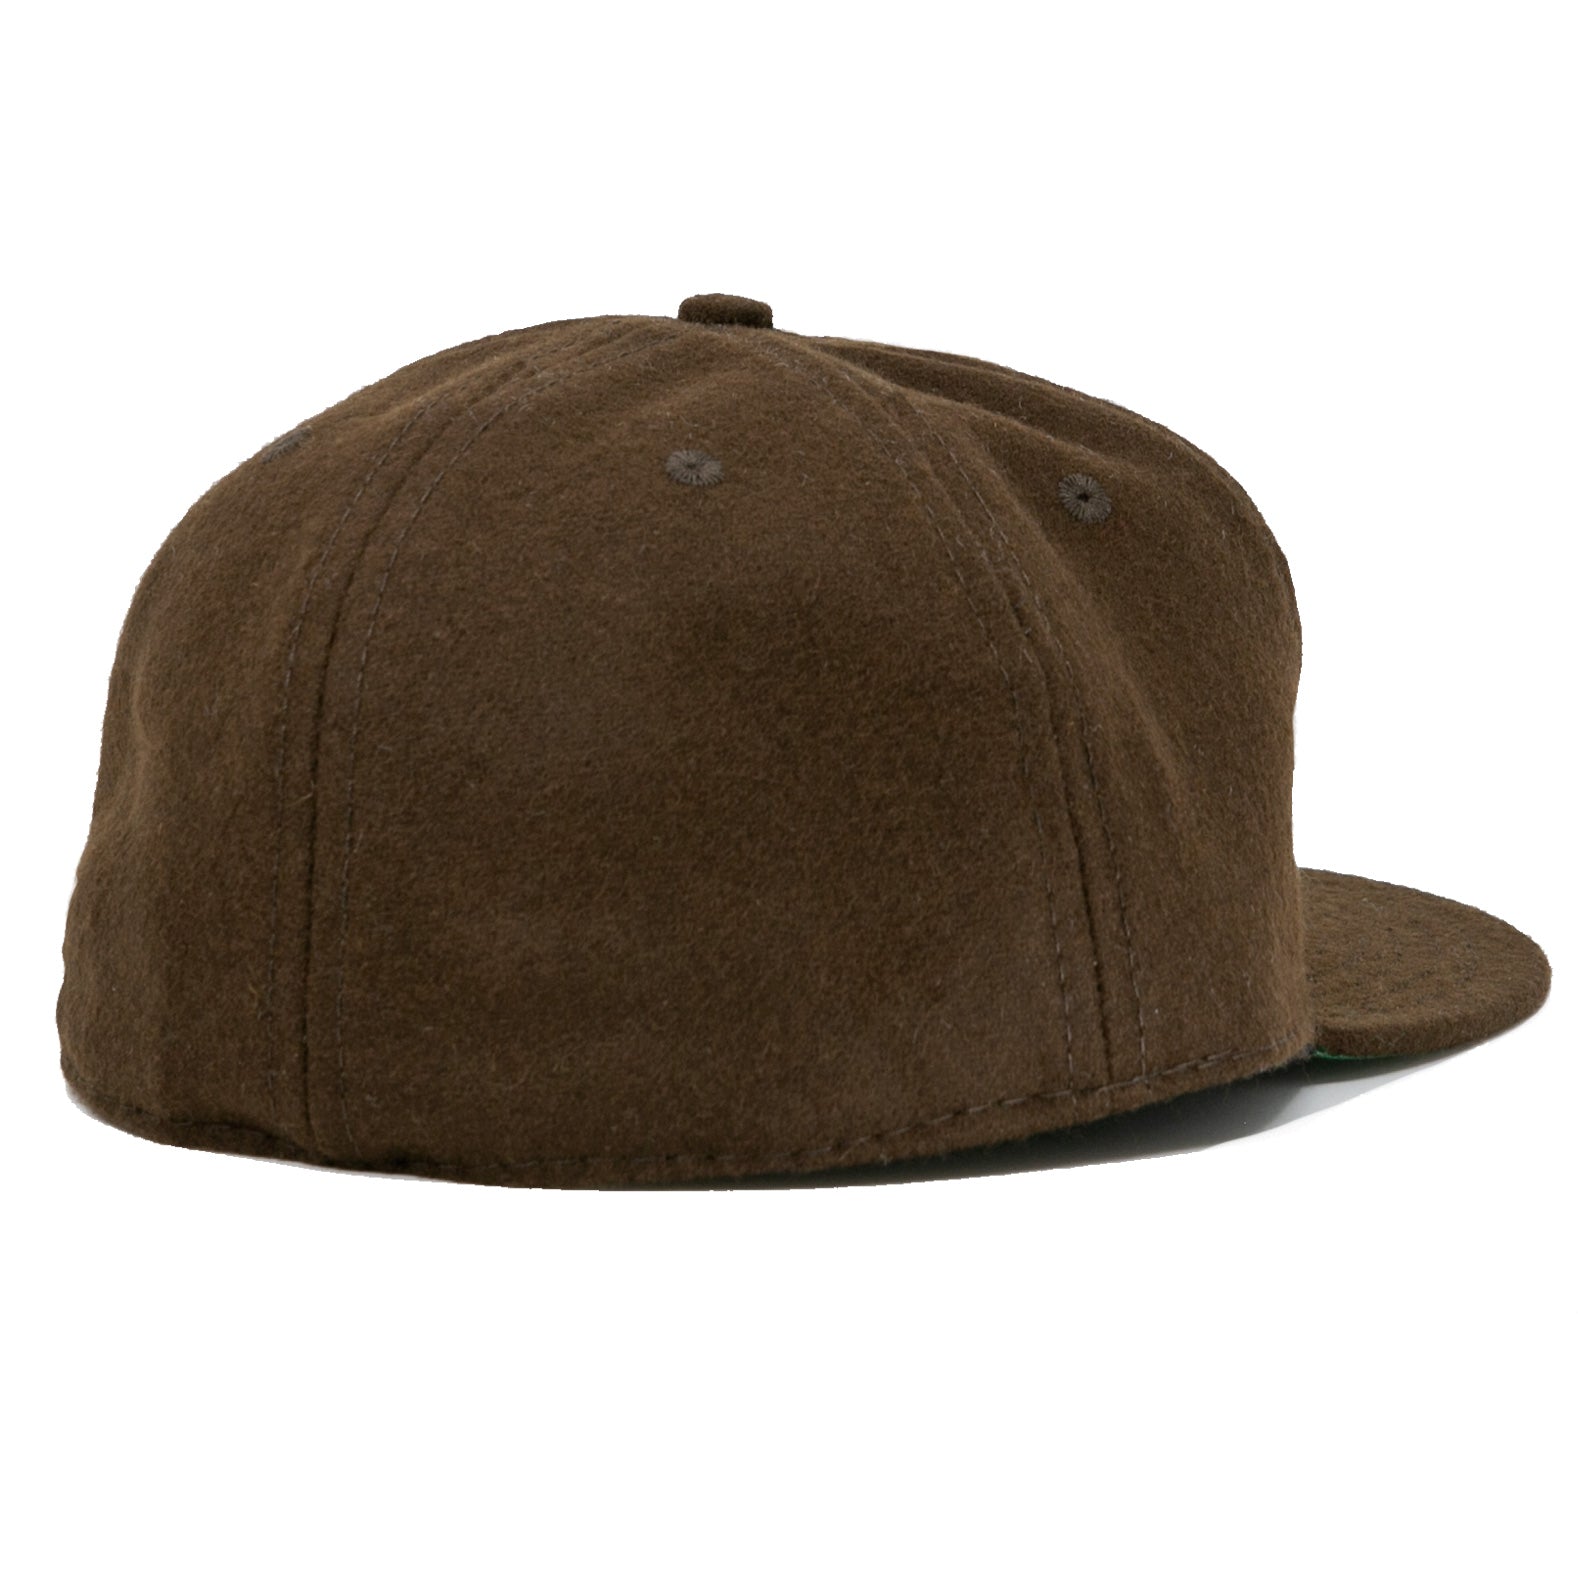 Brown Wool Flannel Baseball Cap - Handmade Lightweight - Fitted Snapback  Sizes Available up to XxL, 2xL, XL, Ballcap - Brown University